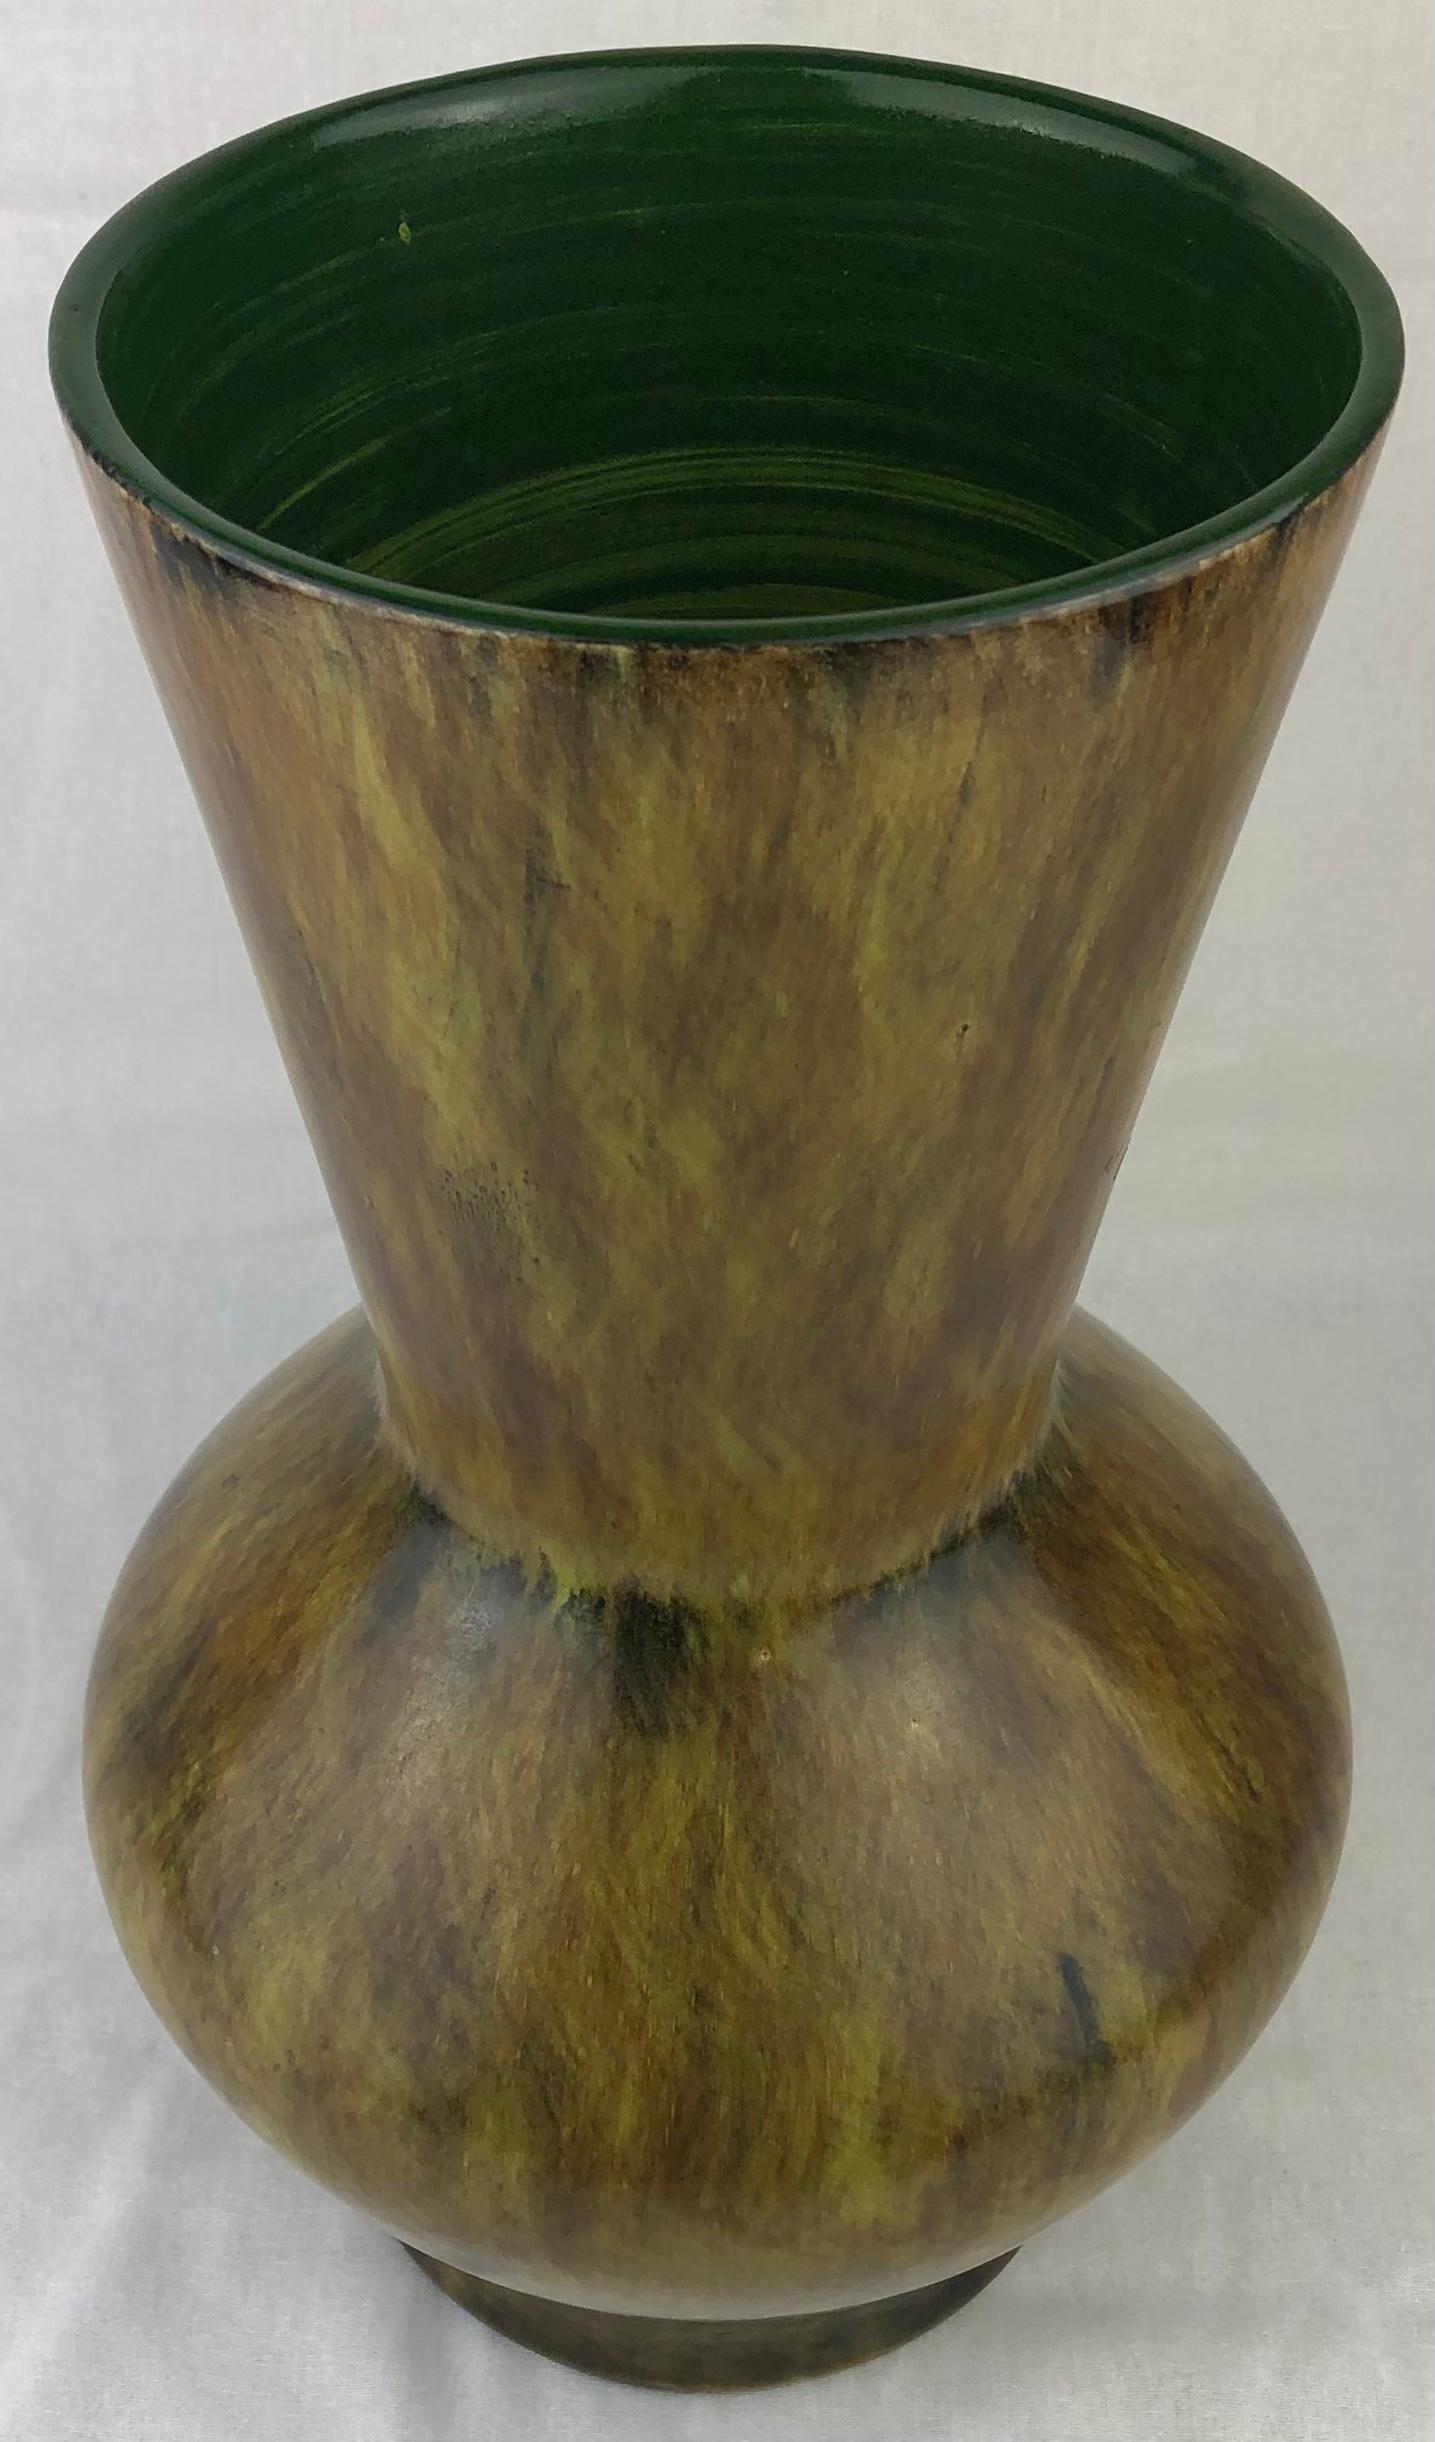 Colorful French mid-20th Century ceramic vase stamped Saint Clement France. A gorgeous decorative object with a wonderful black background and green overtones. It almost appears to be in motion like sea grasses making it very pleasing to the eye.